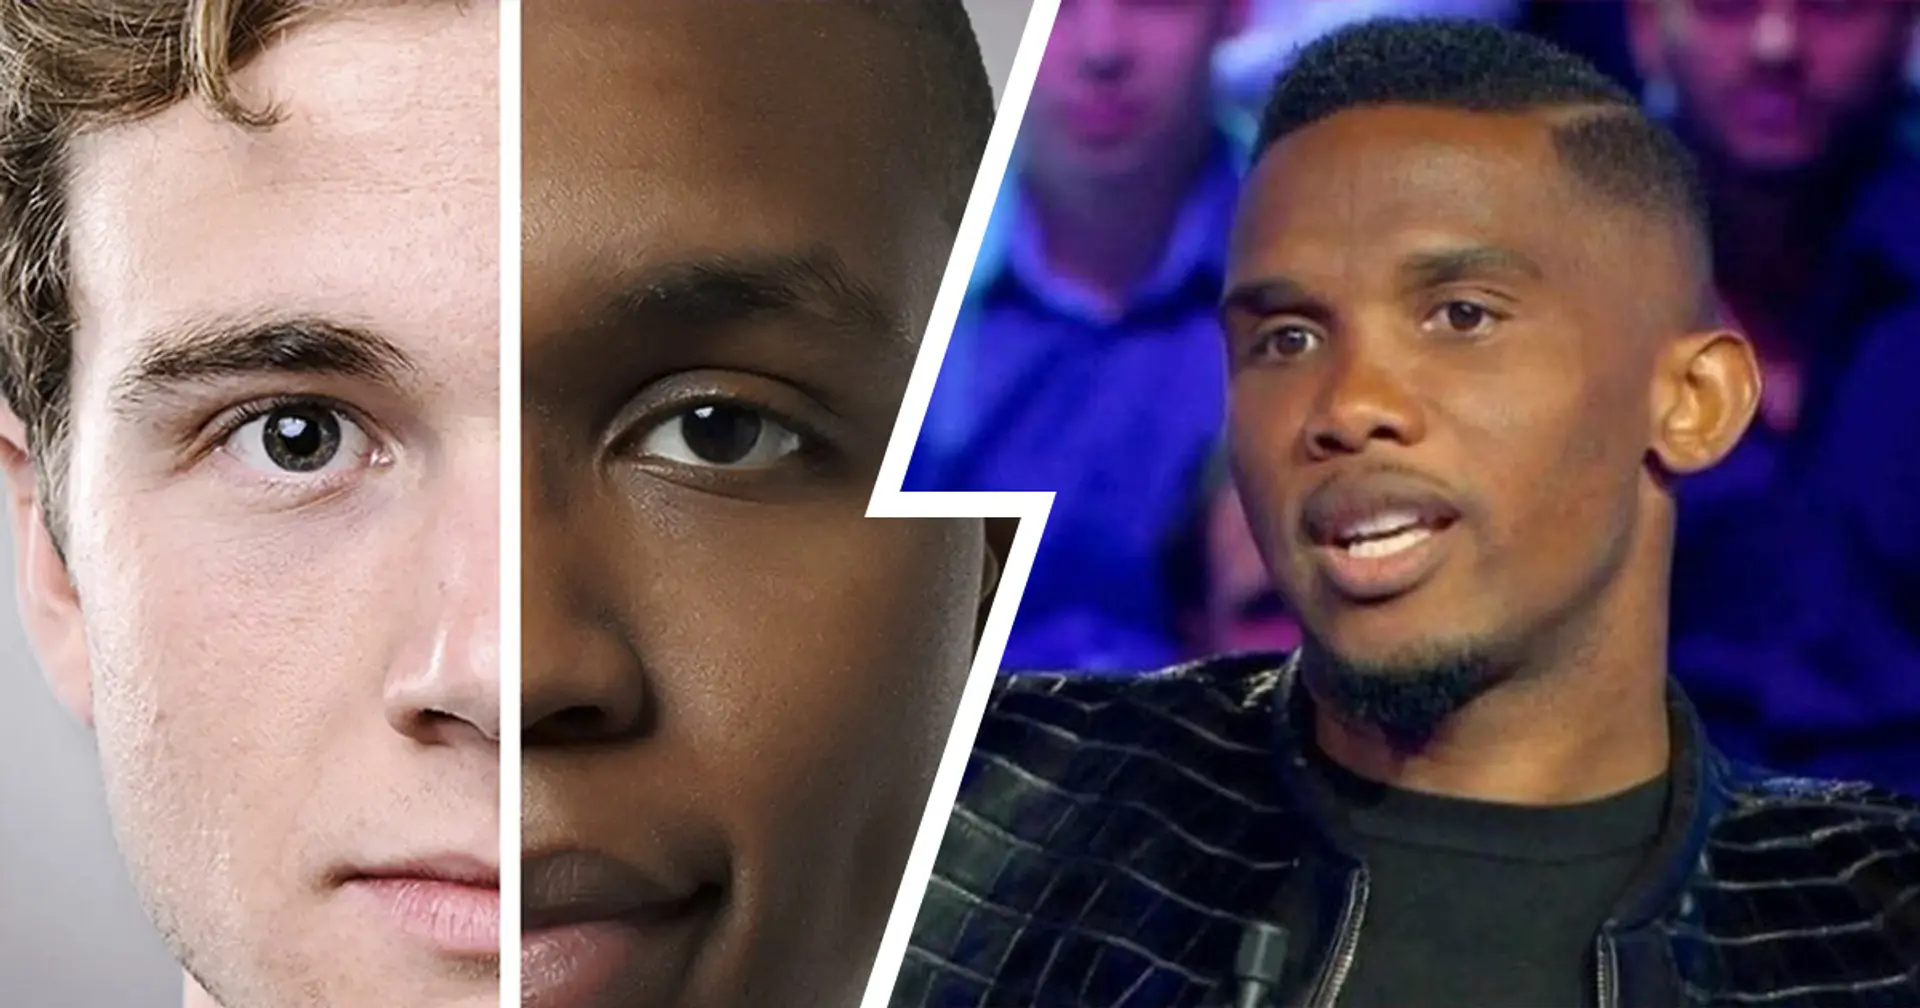 'Europeans are a bit less talented than Africans': Eto'o comes up with controversial World Cup claim